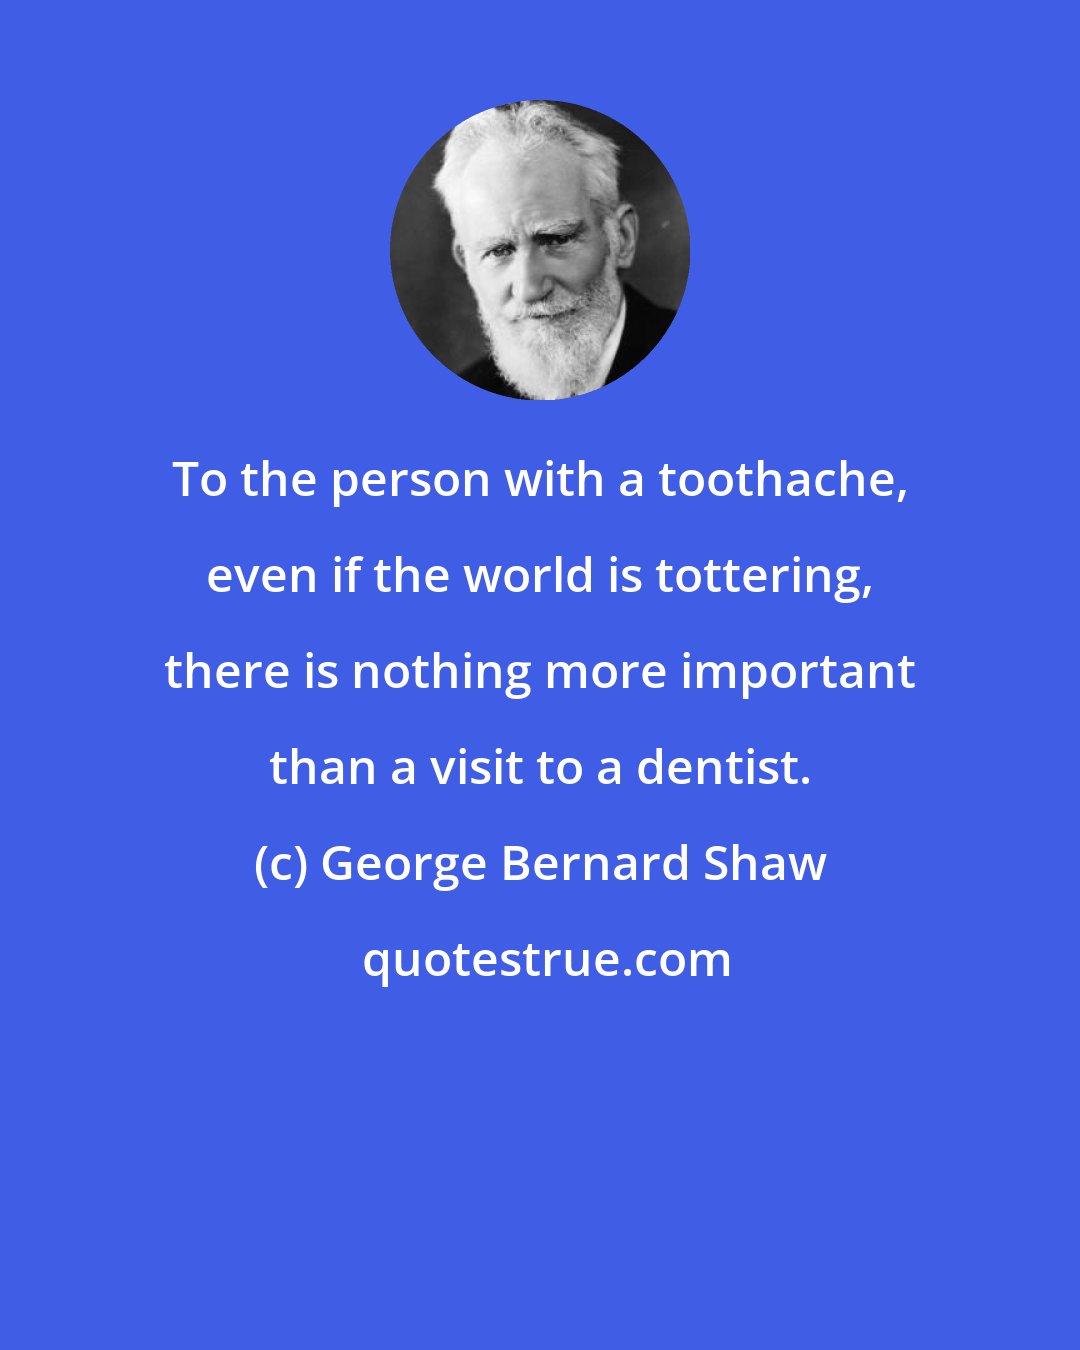 George Bernard Shaw: To the person with a toothache, even if the world is tottering, there is nothing more important than a visit to a dentist.